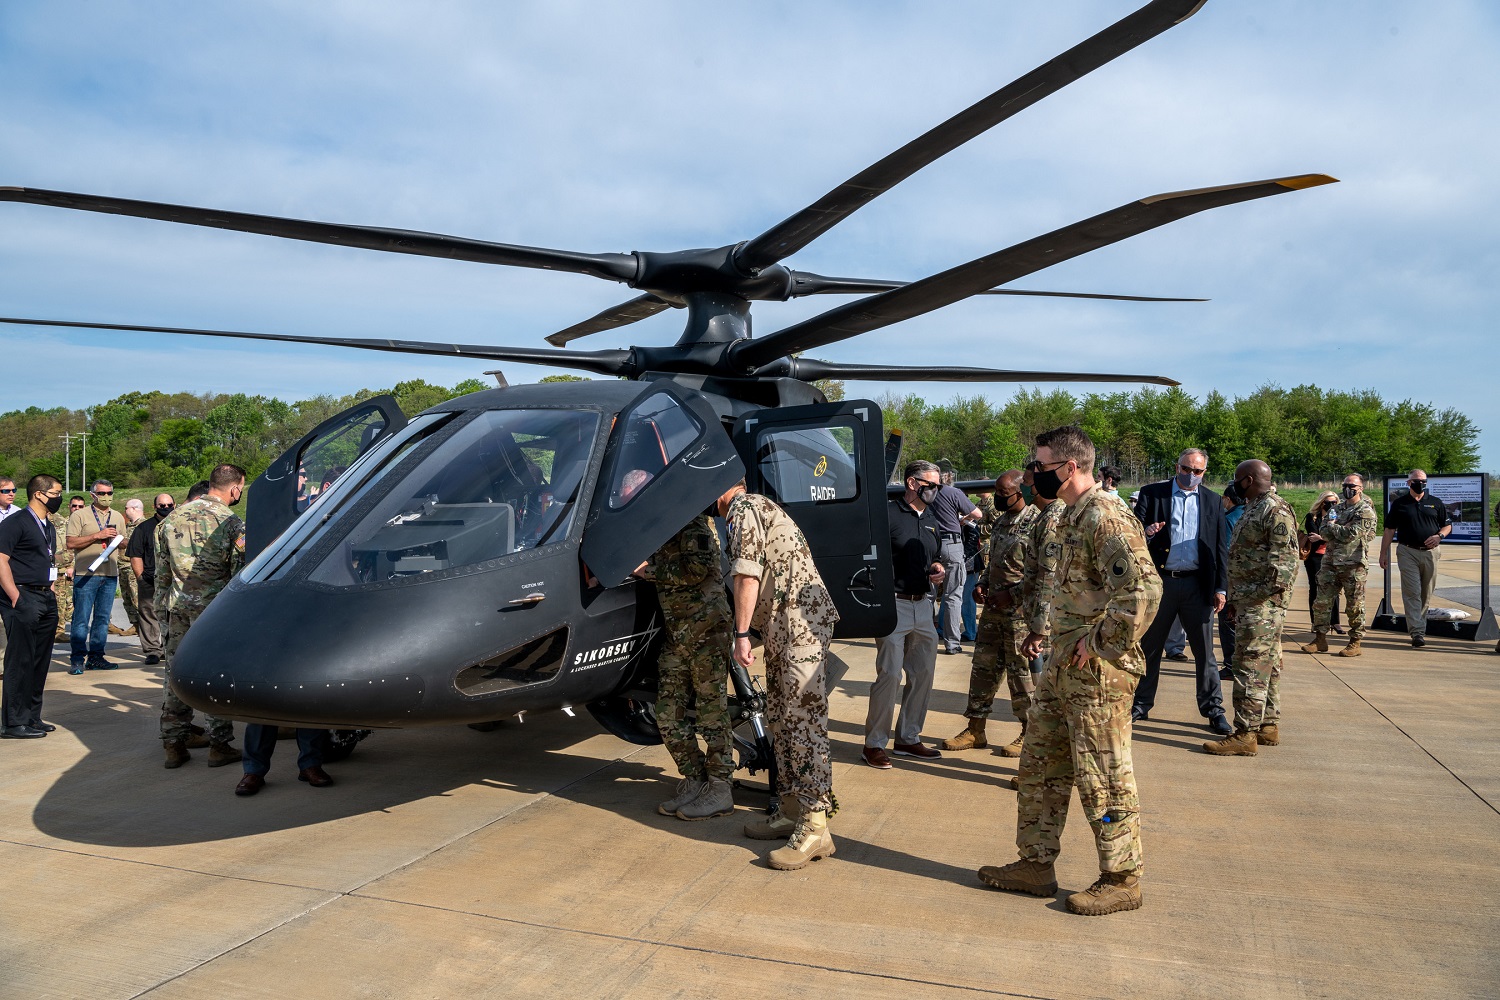 Lockheed Martin Demos Sikorsky S-97 RAIDER Raider Helicopter for US Army